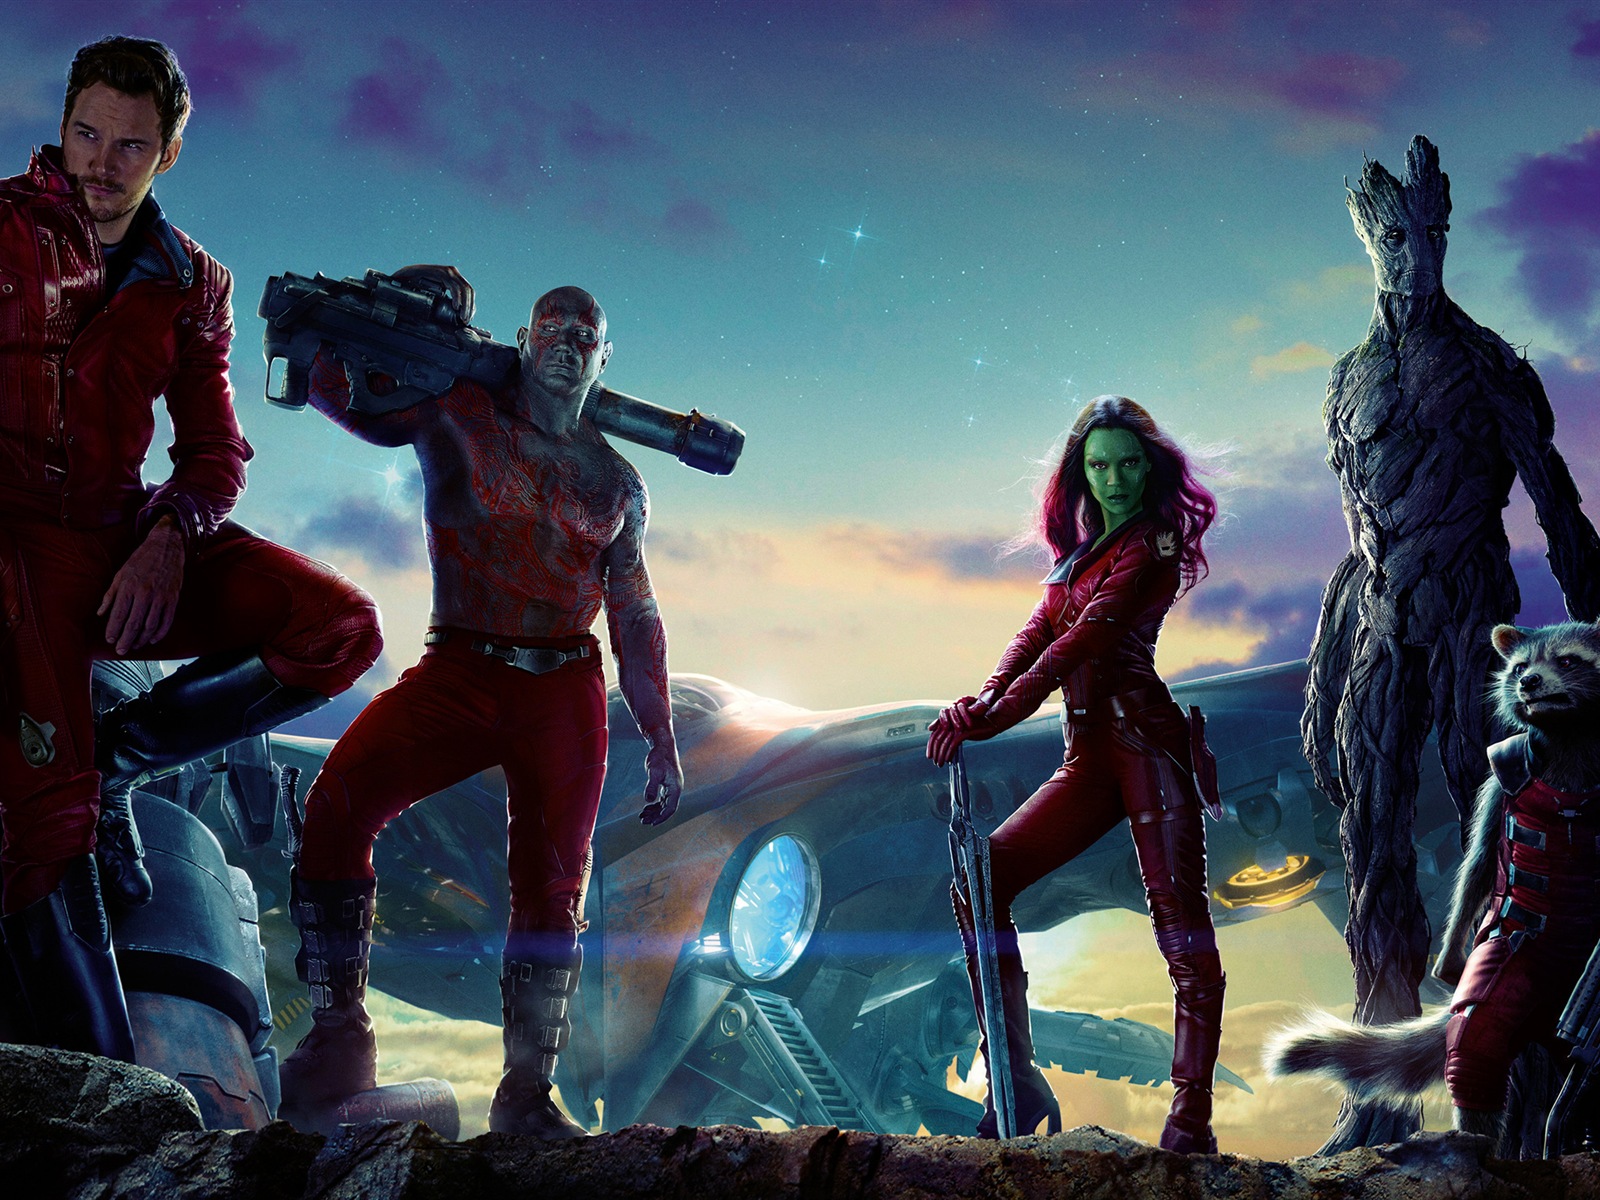 Guardians of the Galaxy 2014 HD movie wallpapers #4 - 1600x1200